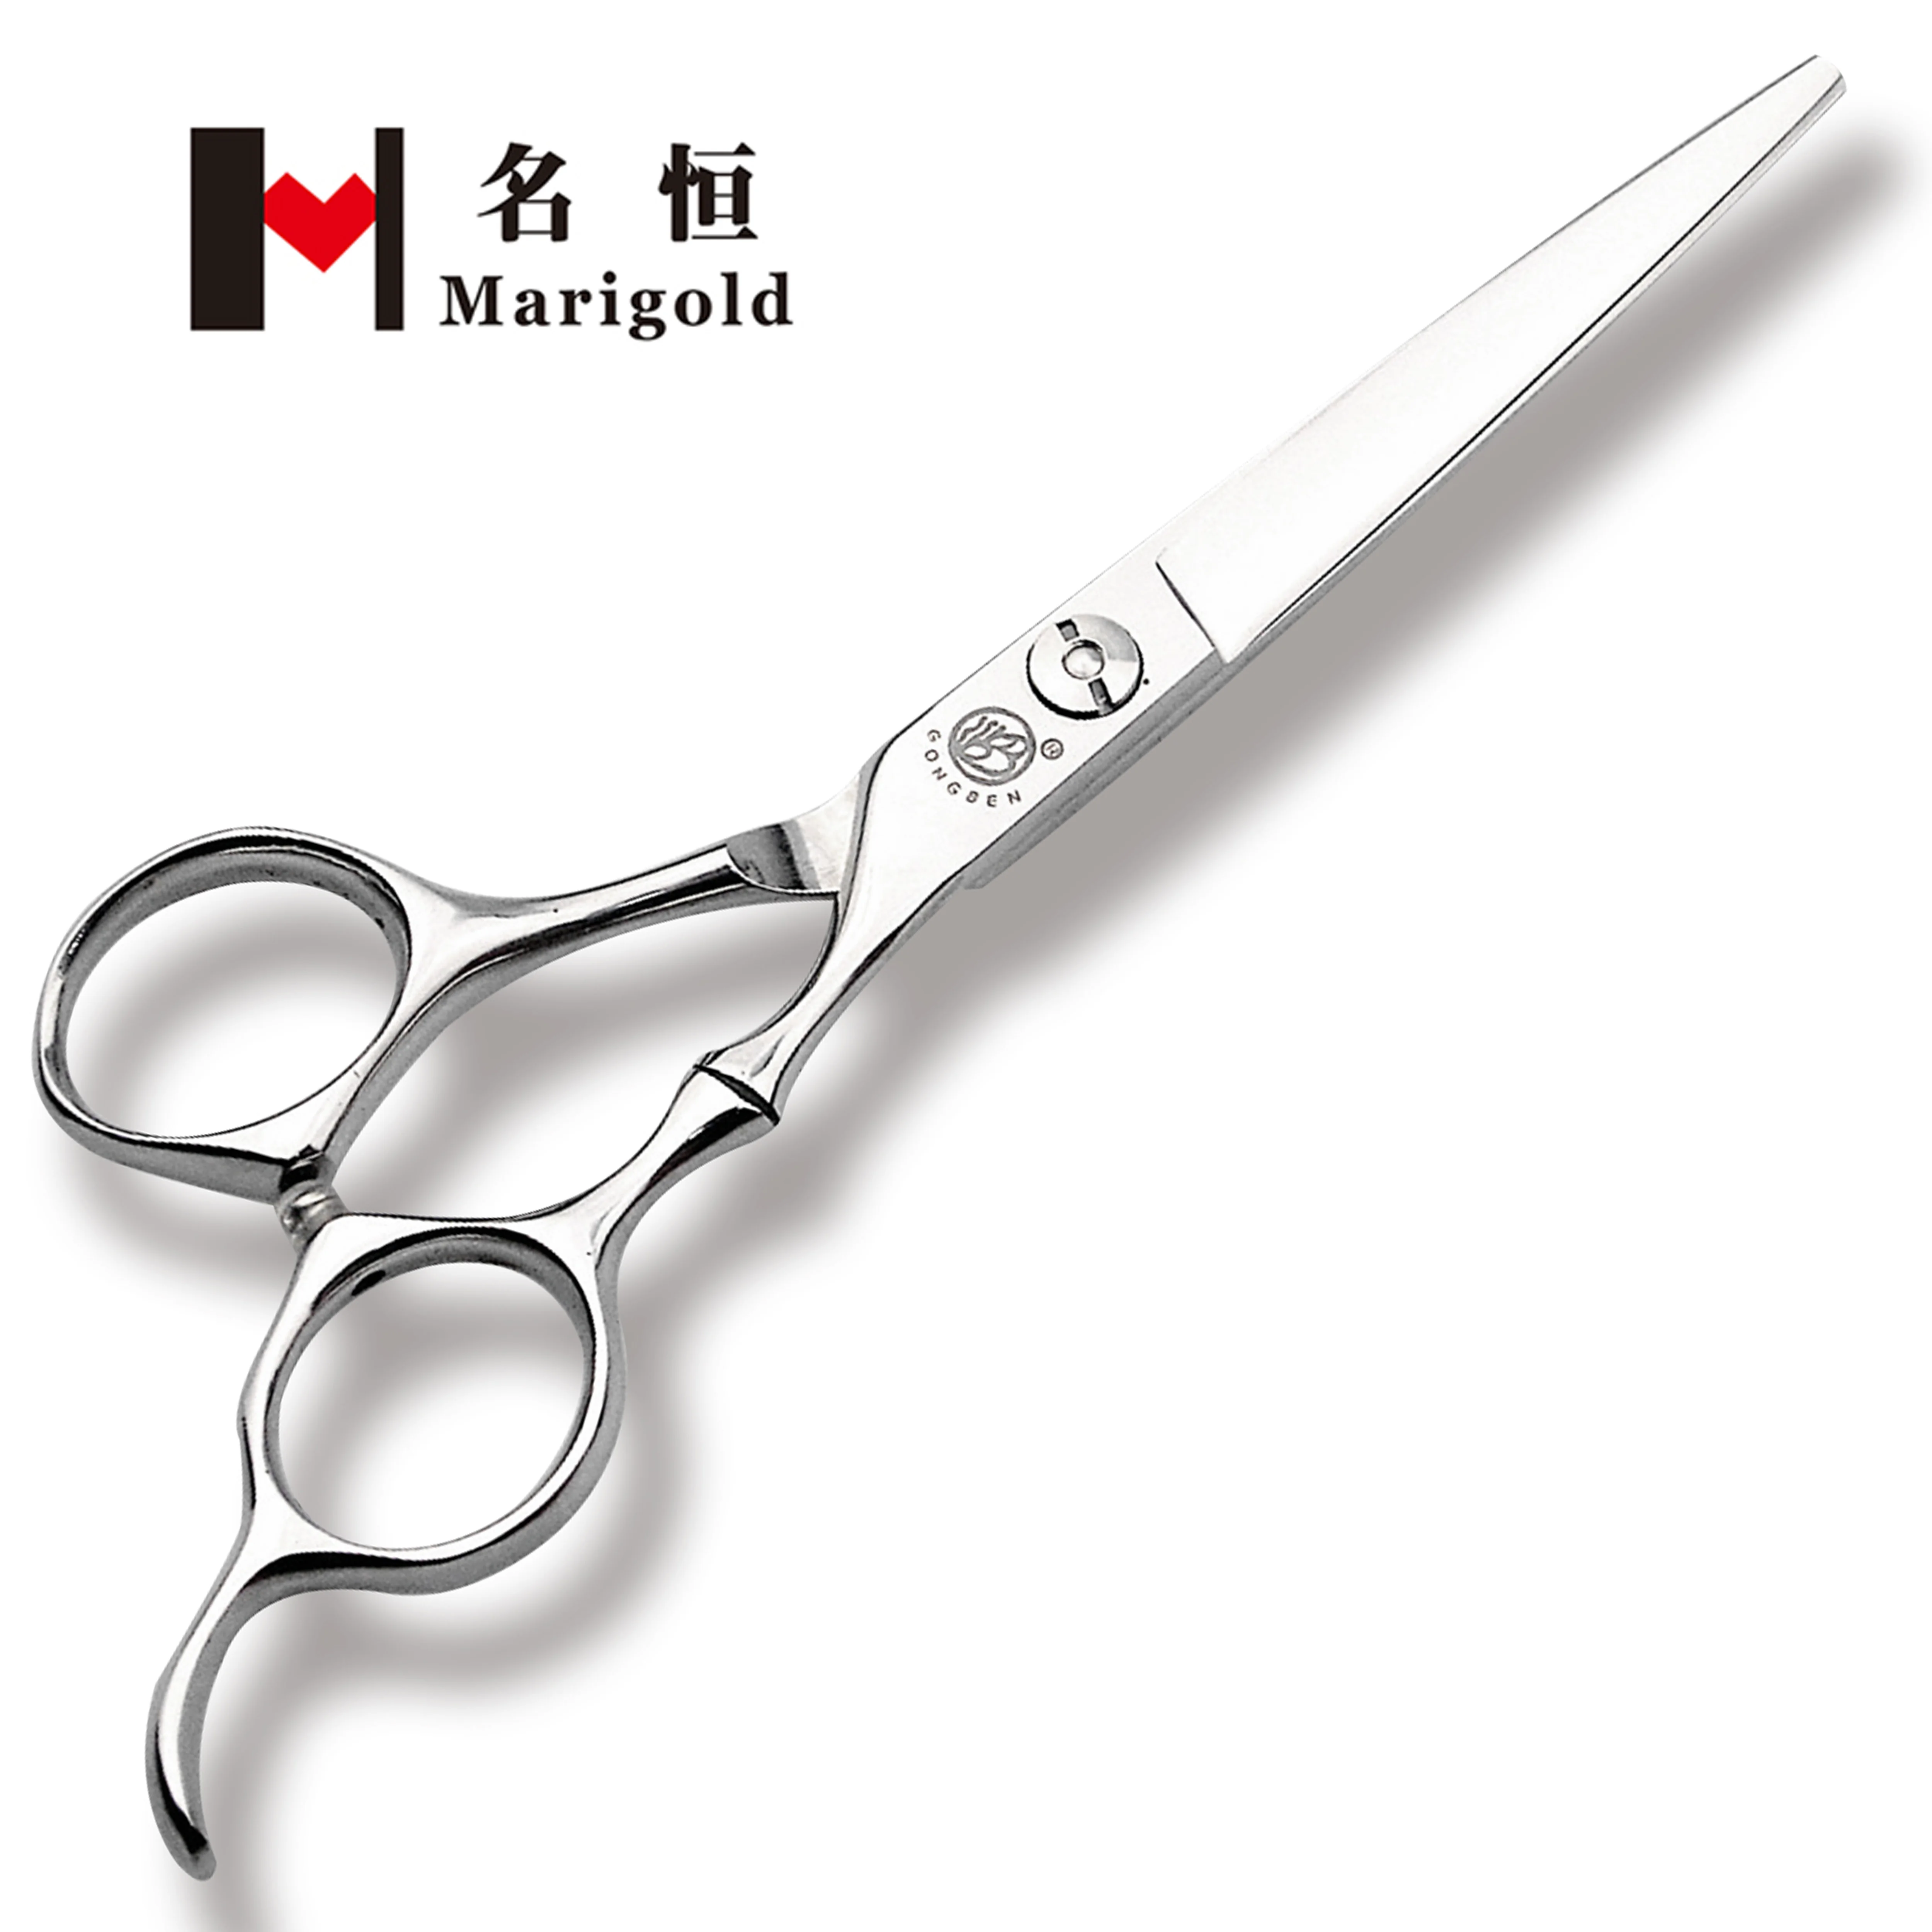 

2022 Wholesale Boutique Pure Handmade Salon 440C Steel Professional Japanese Hairdressing Scissors Sharp and Durable, Silver